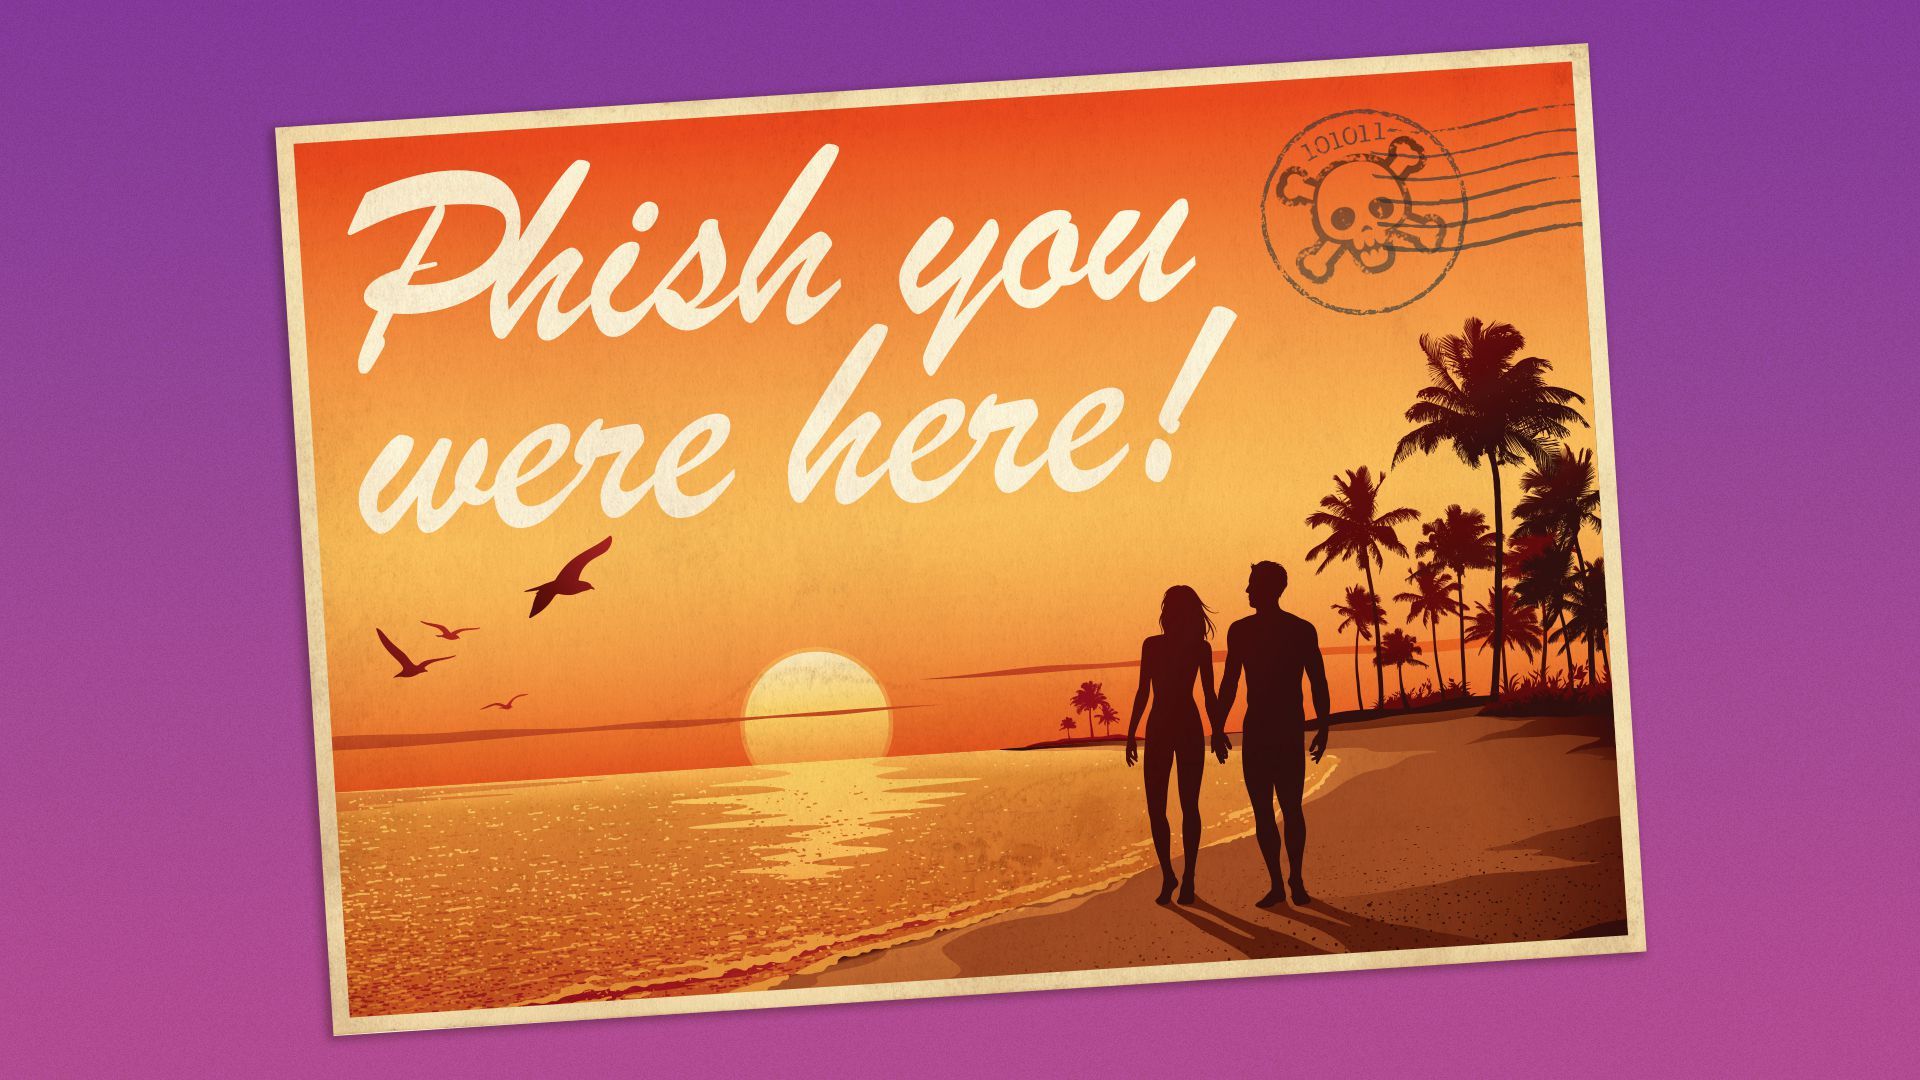 Illustration of a vintage tropical postcard with the words “Phish you were here!”.